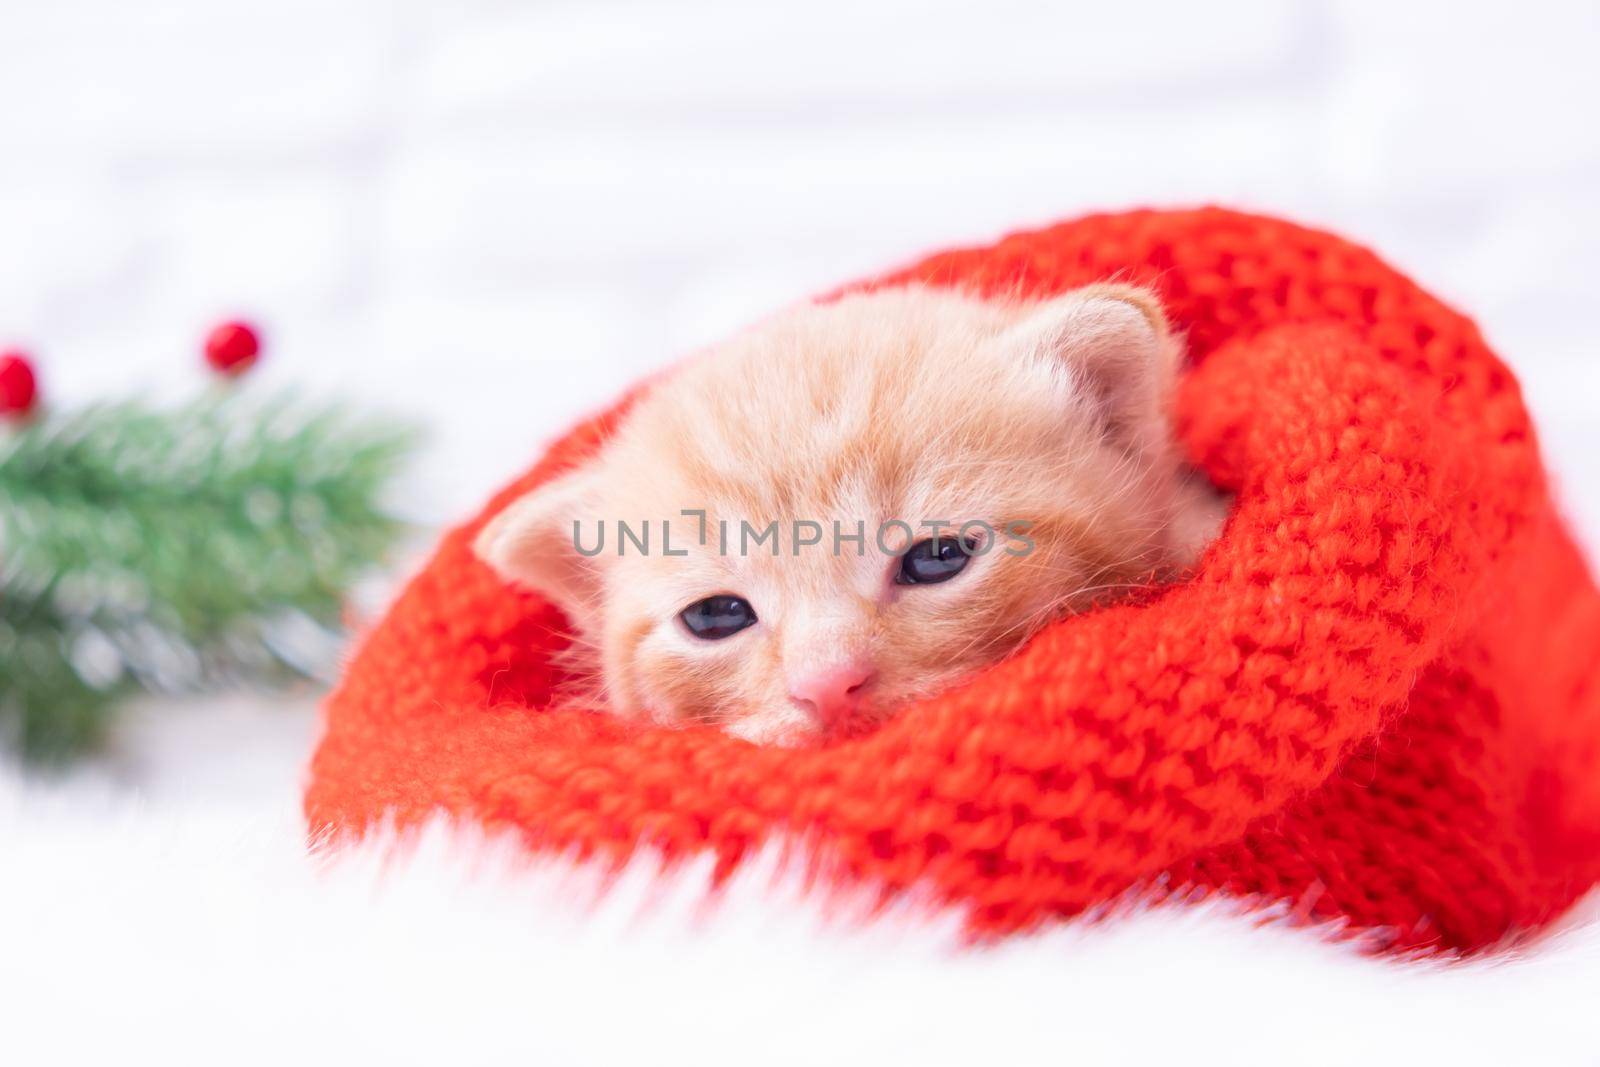 Small Christmas red kitten is sweetly basking and looking at the camera in a knitted red Santa hat. Soft and cozy with a Christmas tree. Christmas, home comfort and new year holidays concept.